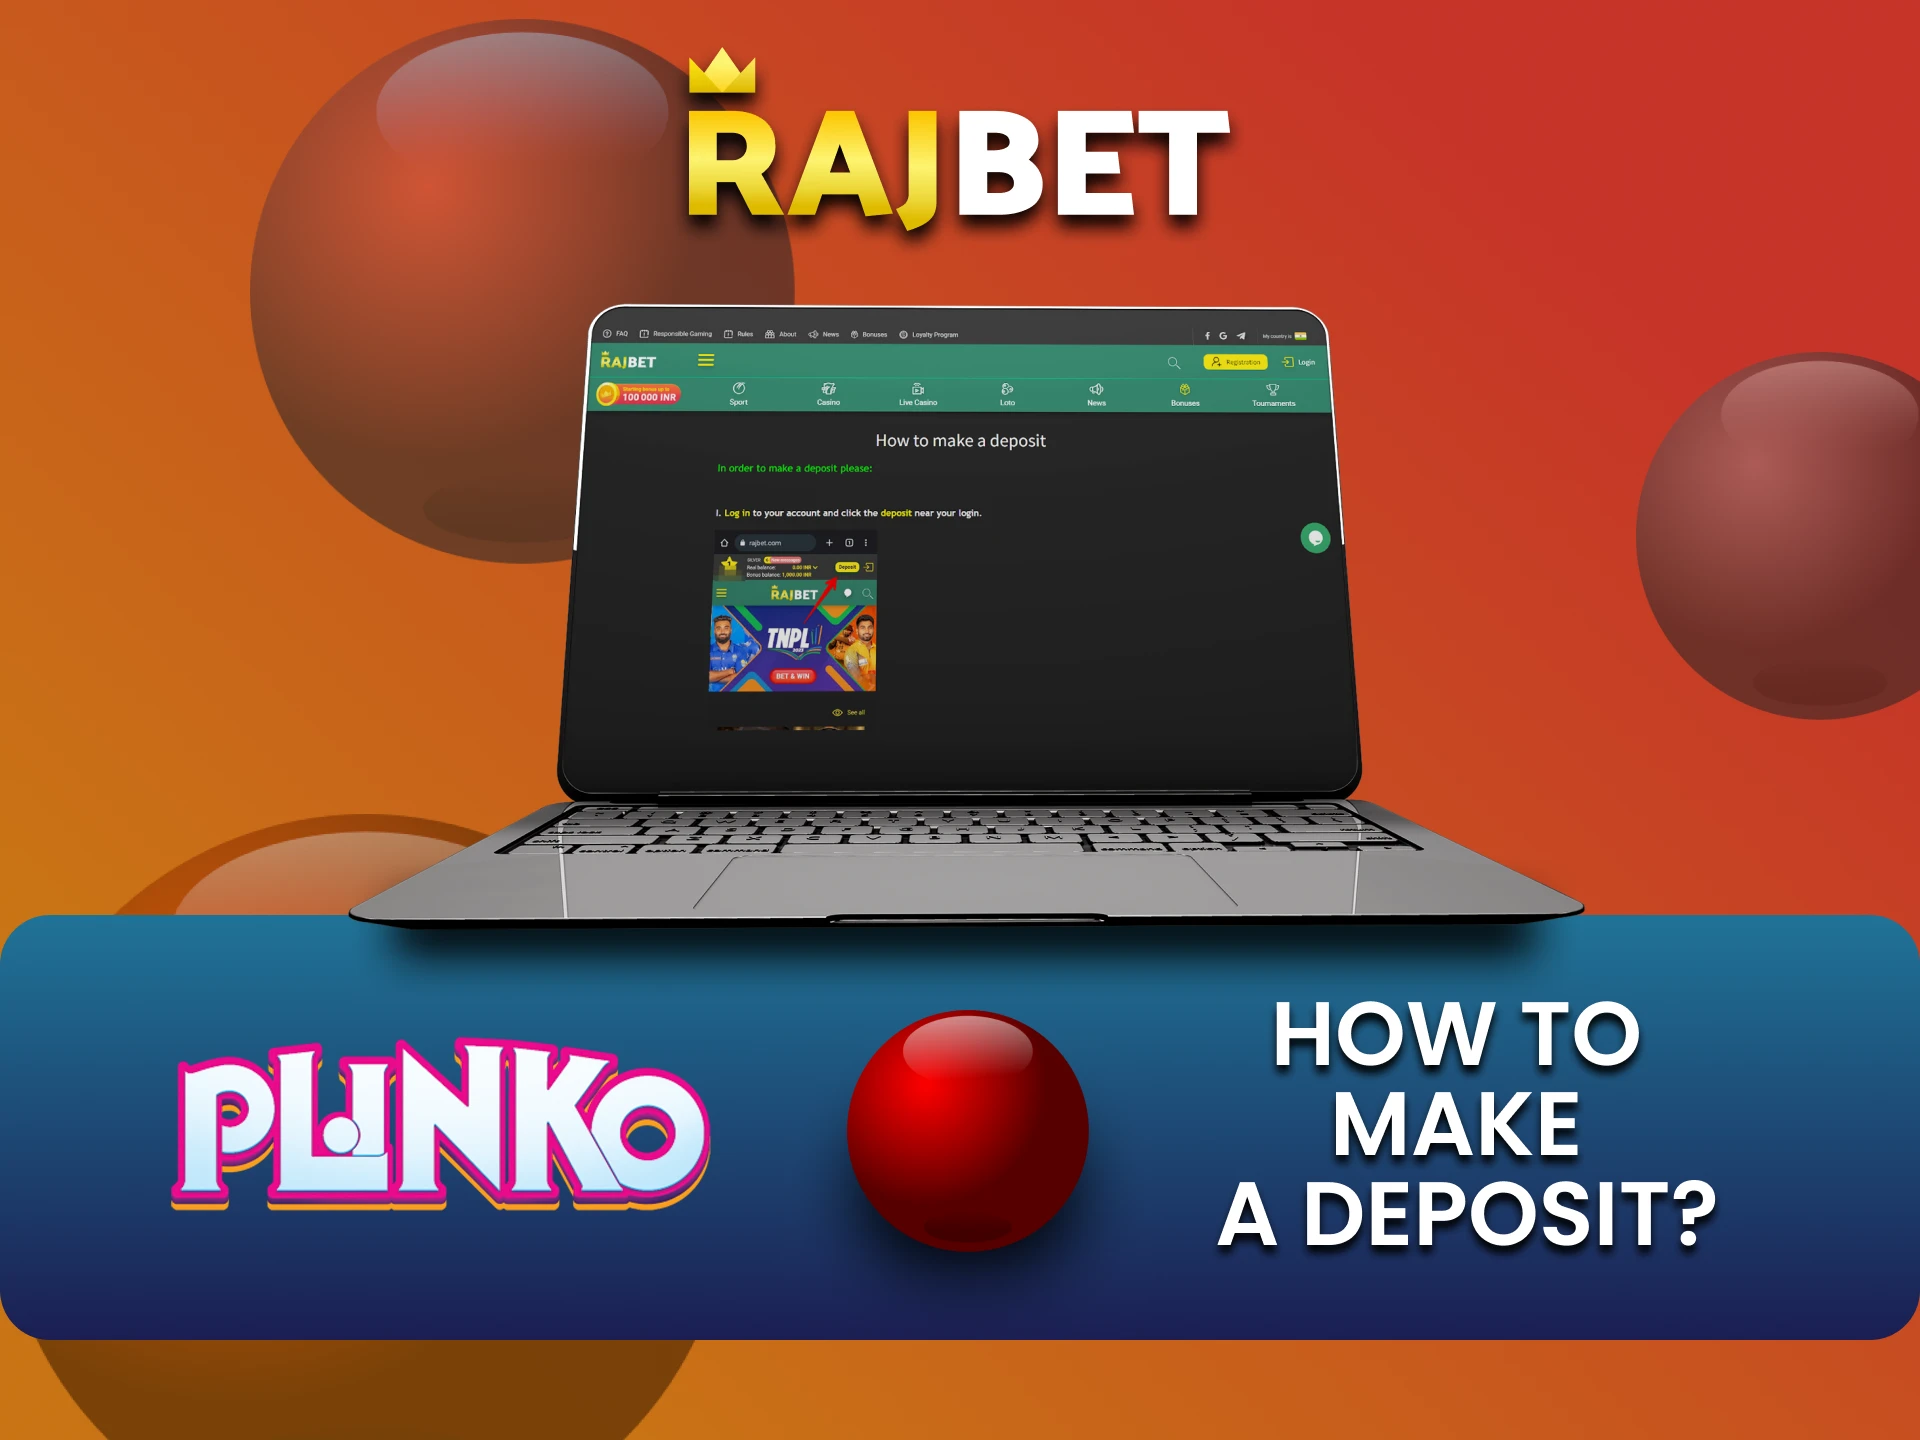 Find out how to deposit funds for Plinko on Rajbet.